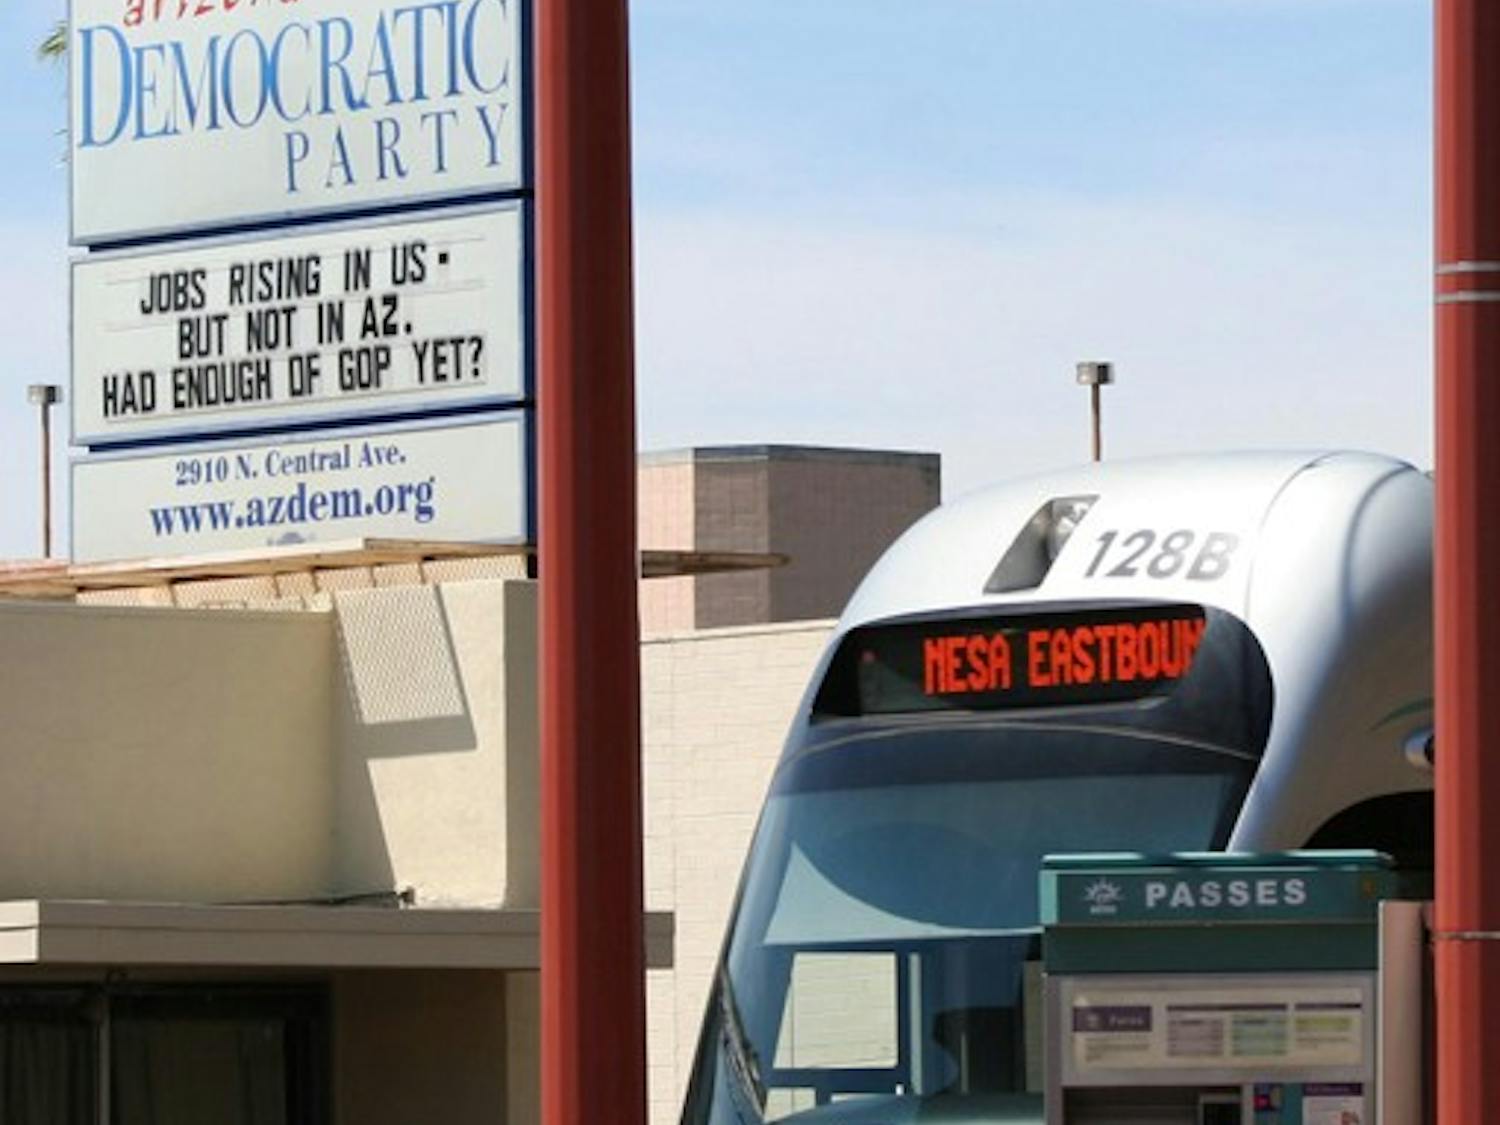 POLITICS ON THE RAIL: The Arizona Democratic Party headquarters located next to the light rail stop at Central Avenue and Thomas Road promotes the Democratic political efforts and voter registration. (Photo by Lisa Bartoli)